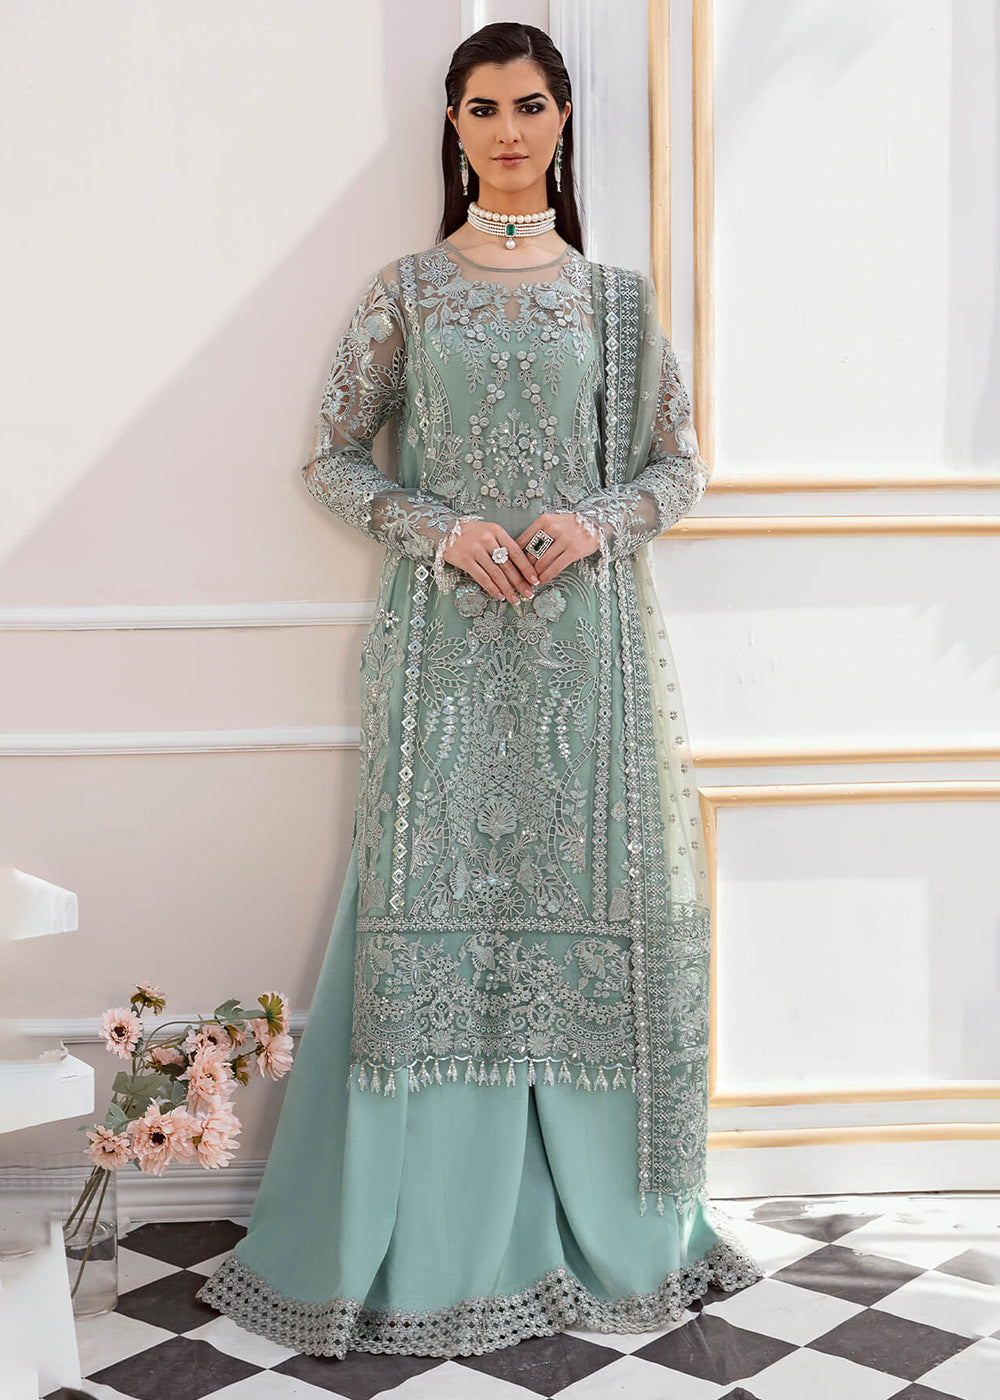 Buy Now Maia Wedding Formals 23 by Imrozia Premium | S-1072 - ESTELLE Online in USA, UK, Canada & Worldwide at Empress Clothing.